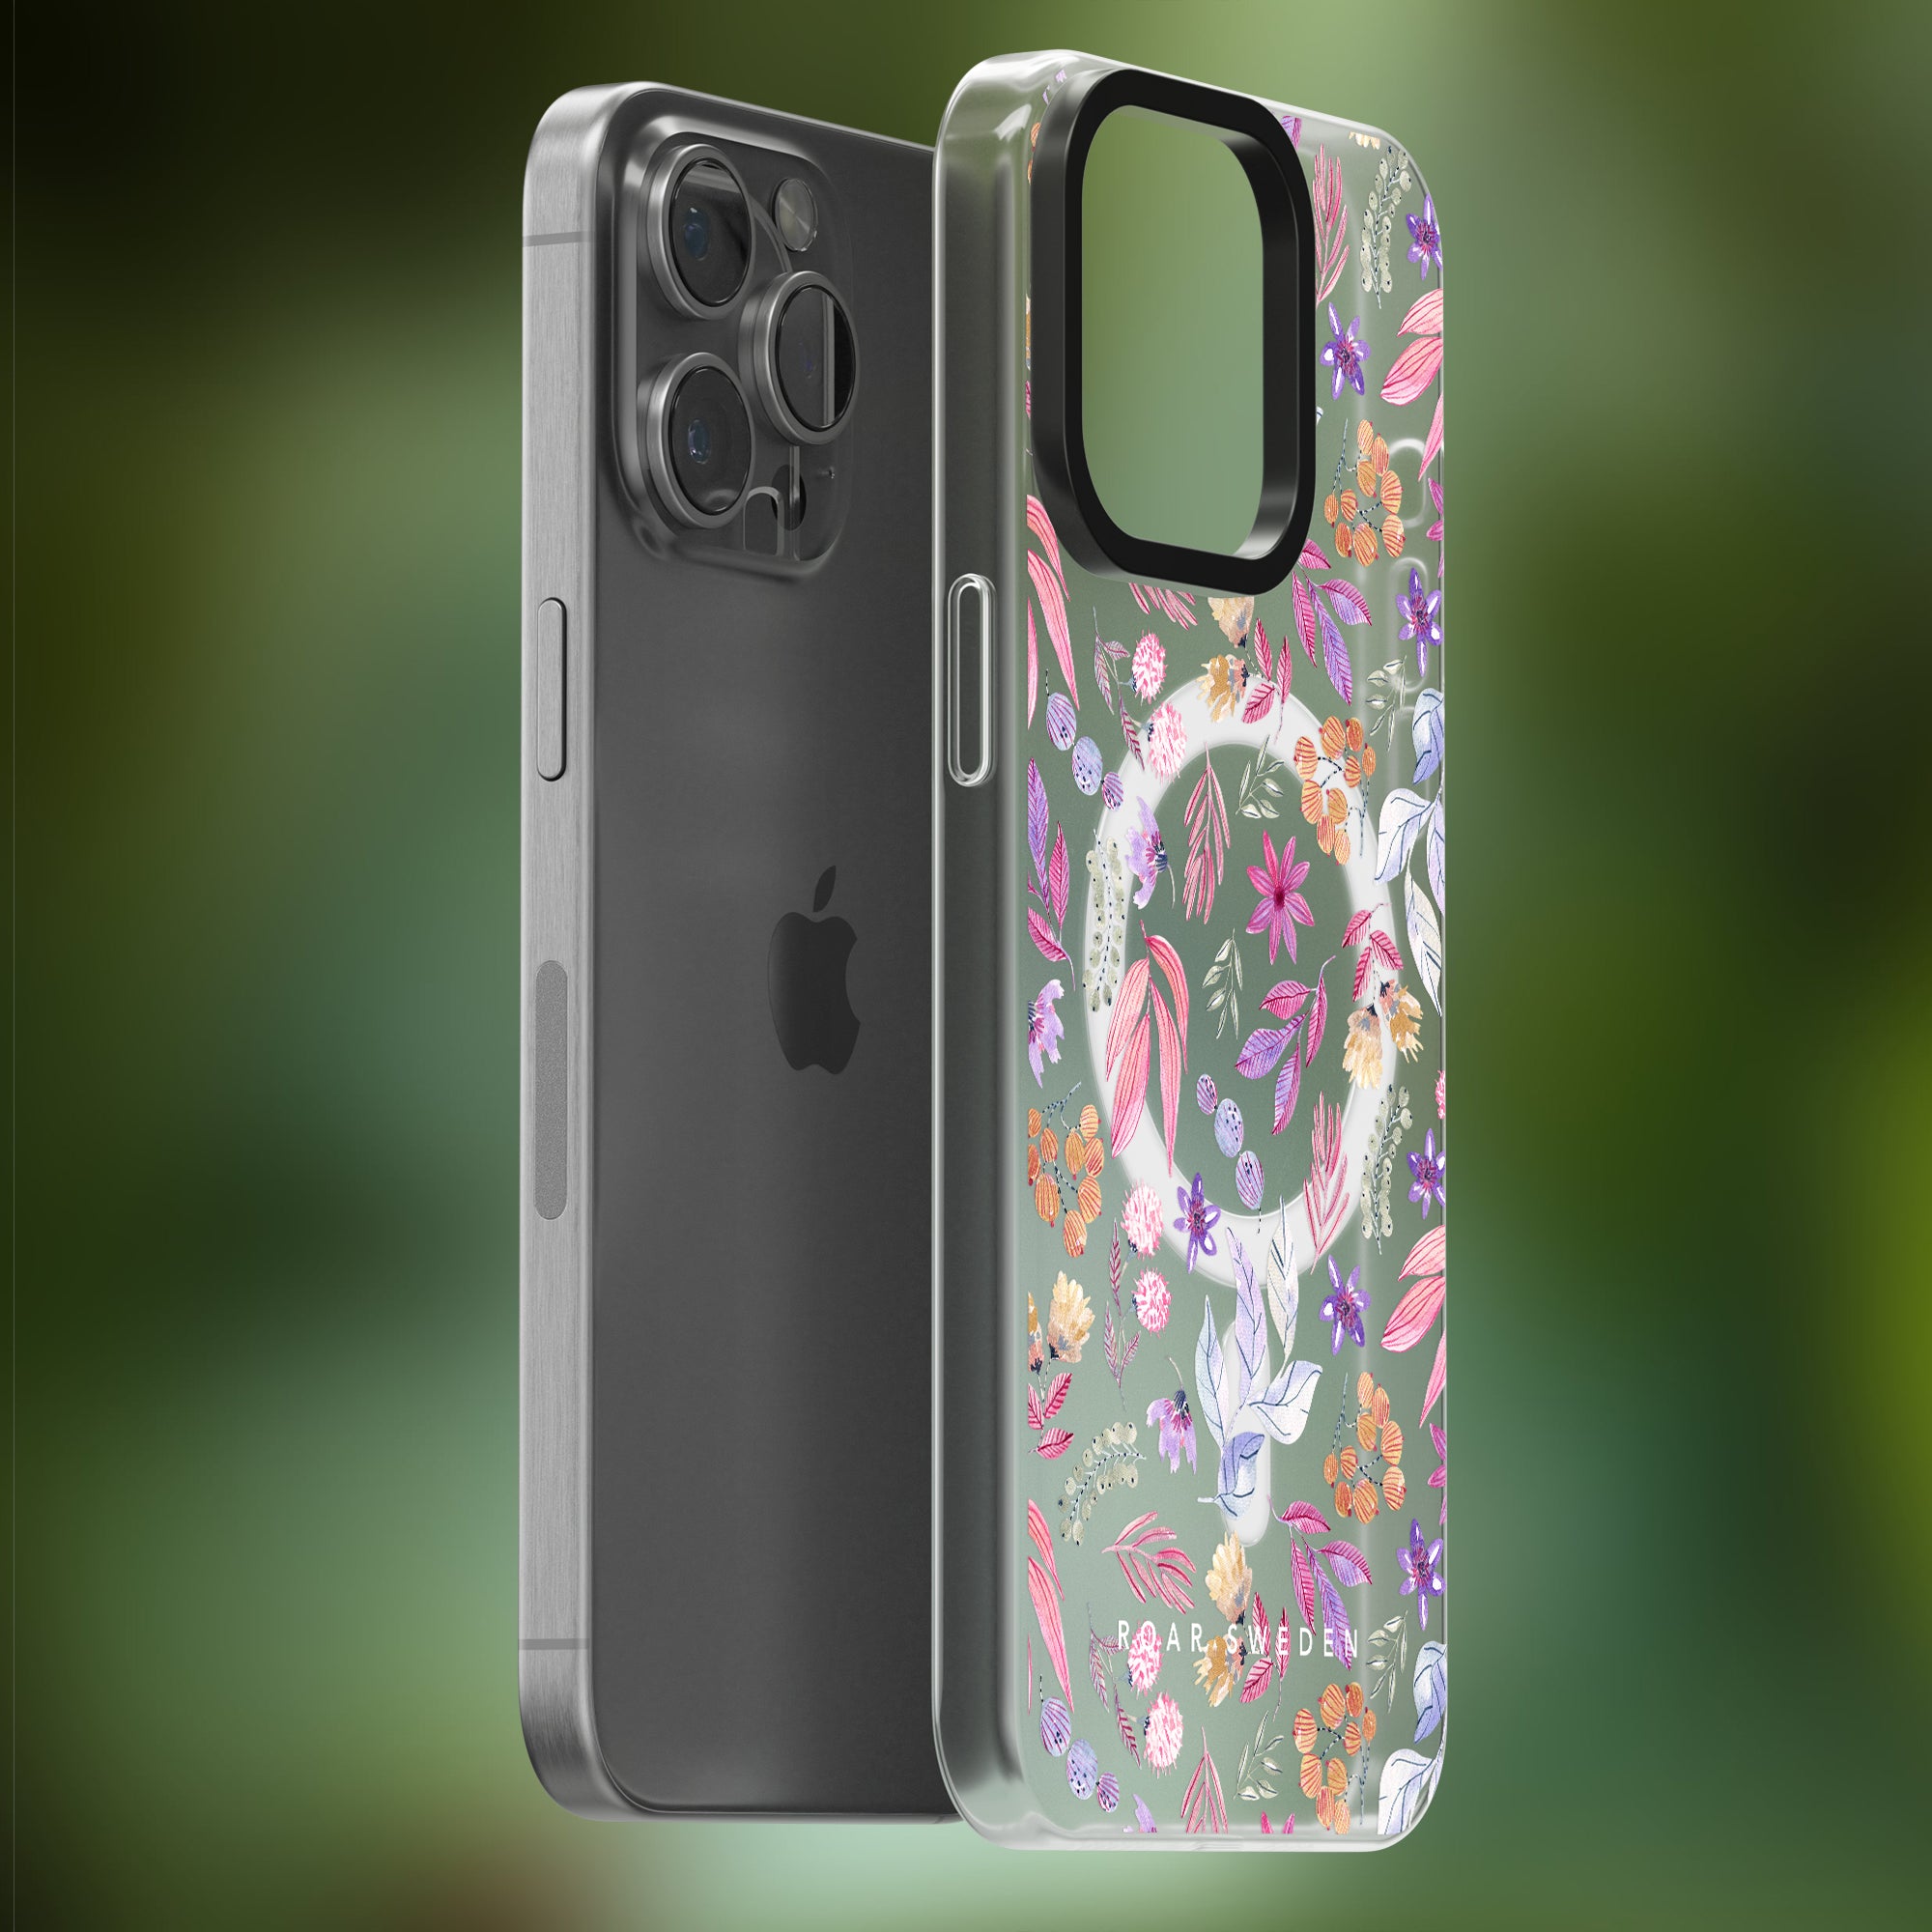 A smartphone with a black and grey color scheme is shown beside a Flower Power - MagSafe featuring a vibrant, floral design.